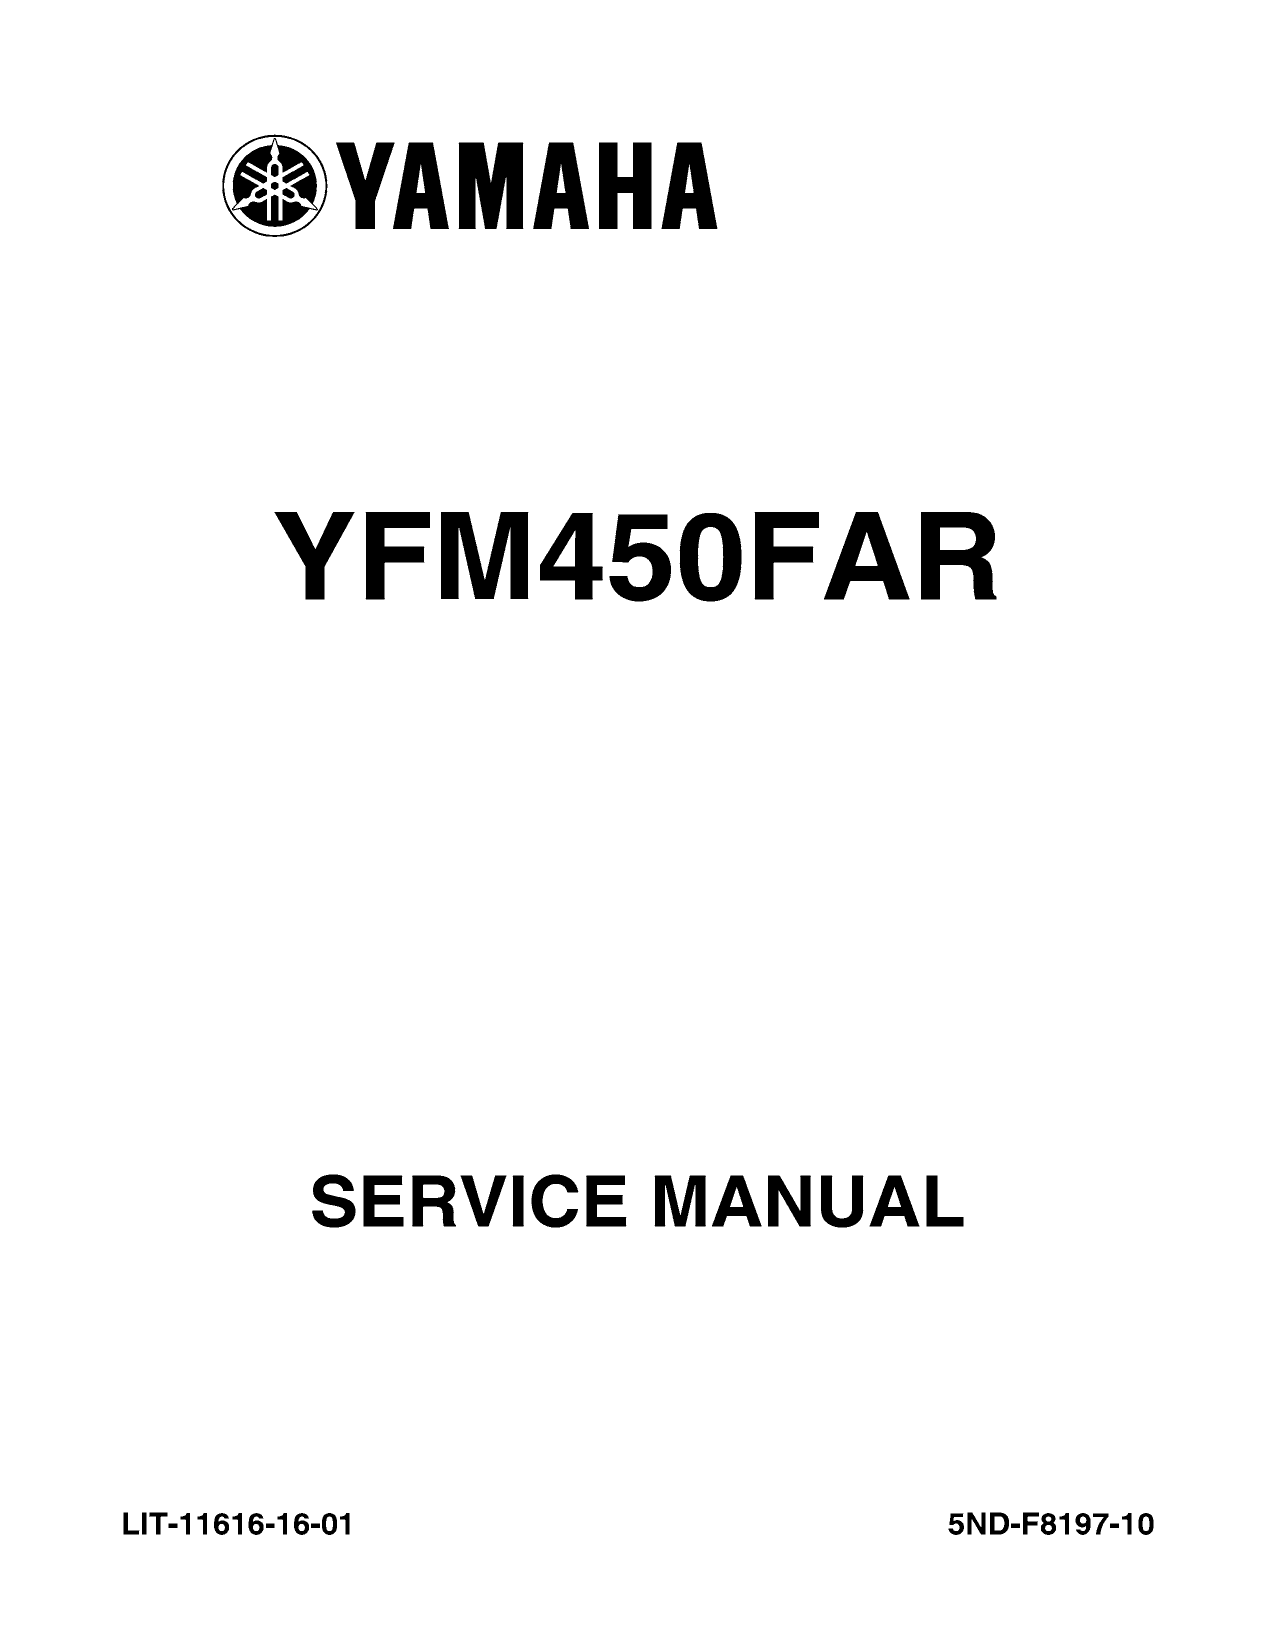 2009-2010 Yamaha Grizzly 450 4WD YFM450 repair manual Preview image 2